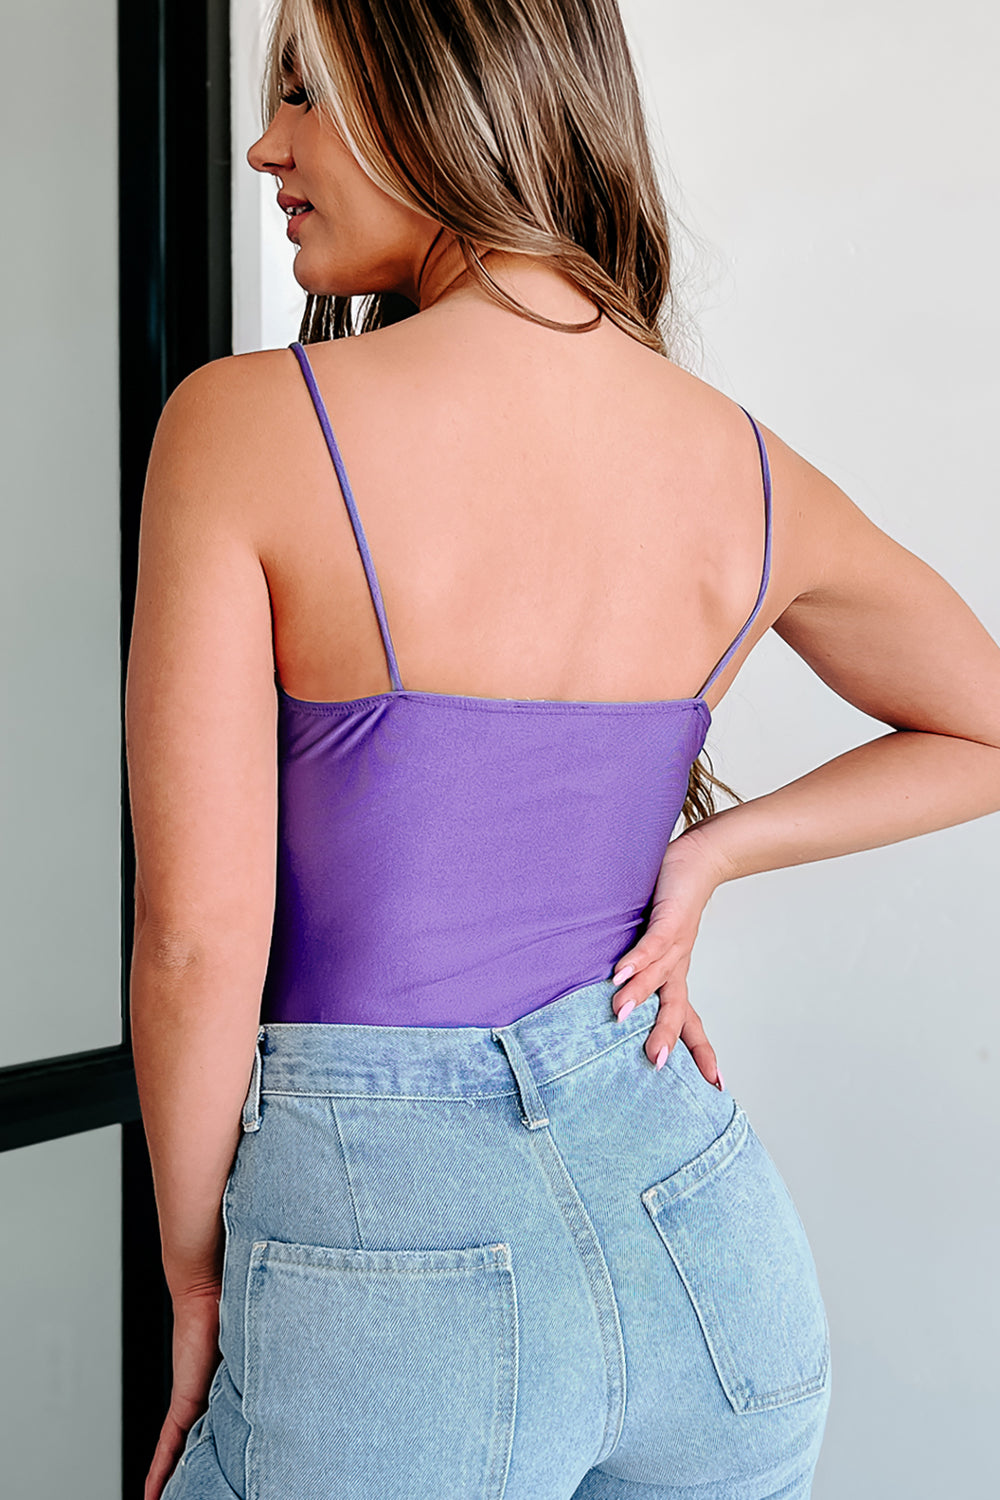 In Your Thoughts Cowl Neck Bodysuit (Violet) - NanaMacs